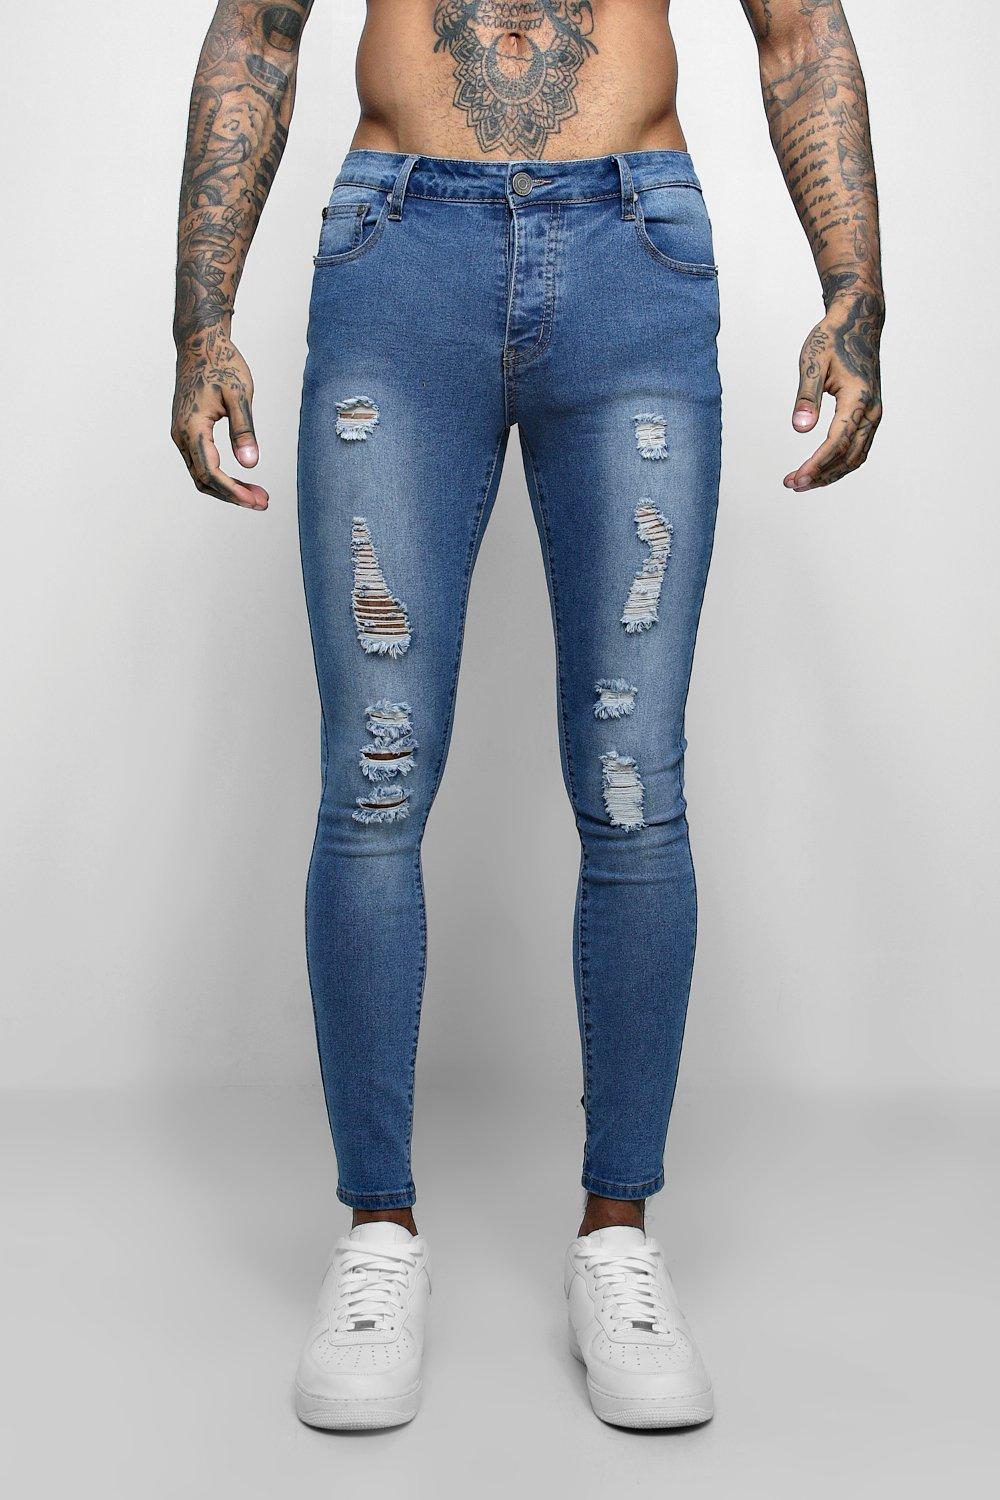 All Over Ripped Super Skinny Fit Jeans - boohooMAN